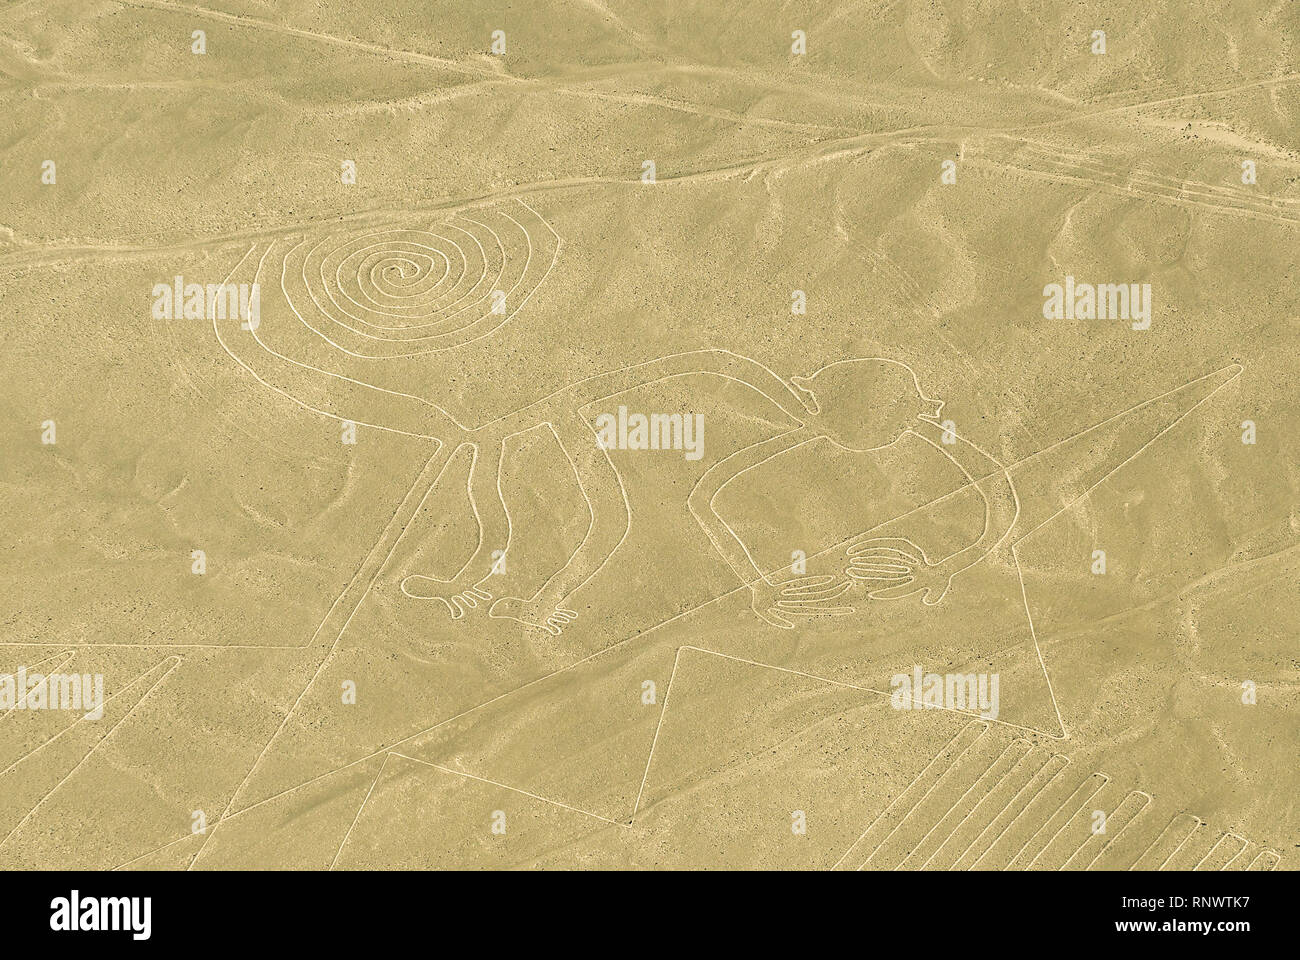 The monkey figure drawing in the desert sand known as the Nazca Lines near the city of Nazca, Peru, South America. Stock Photo